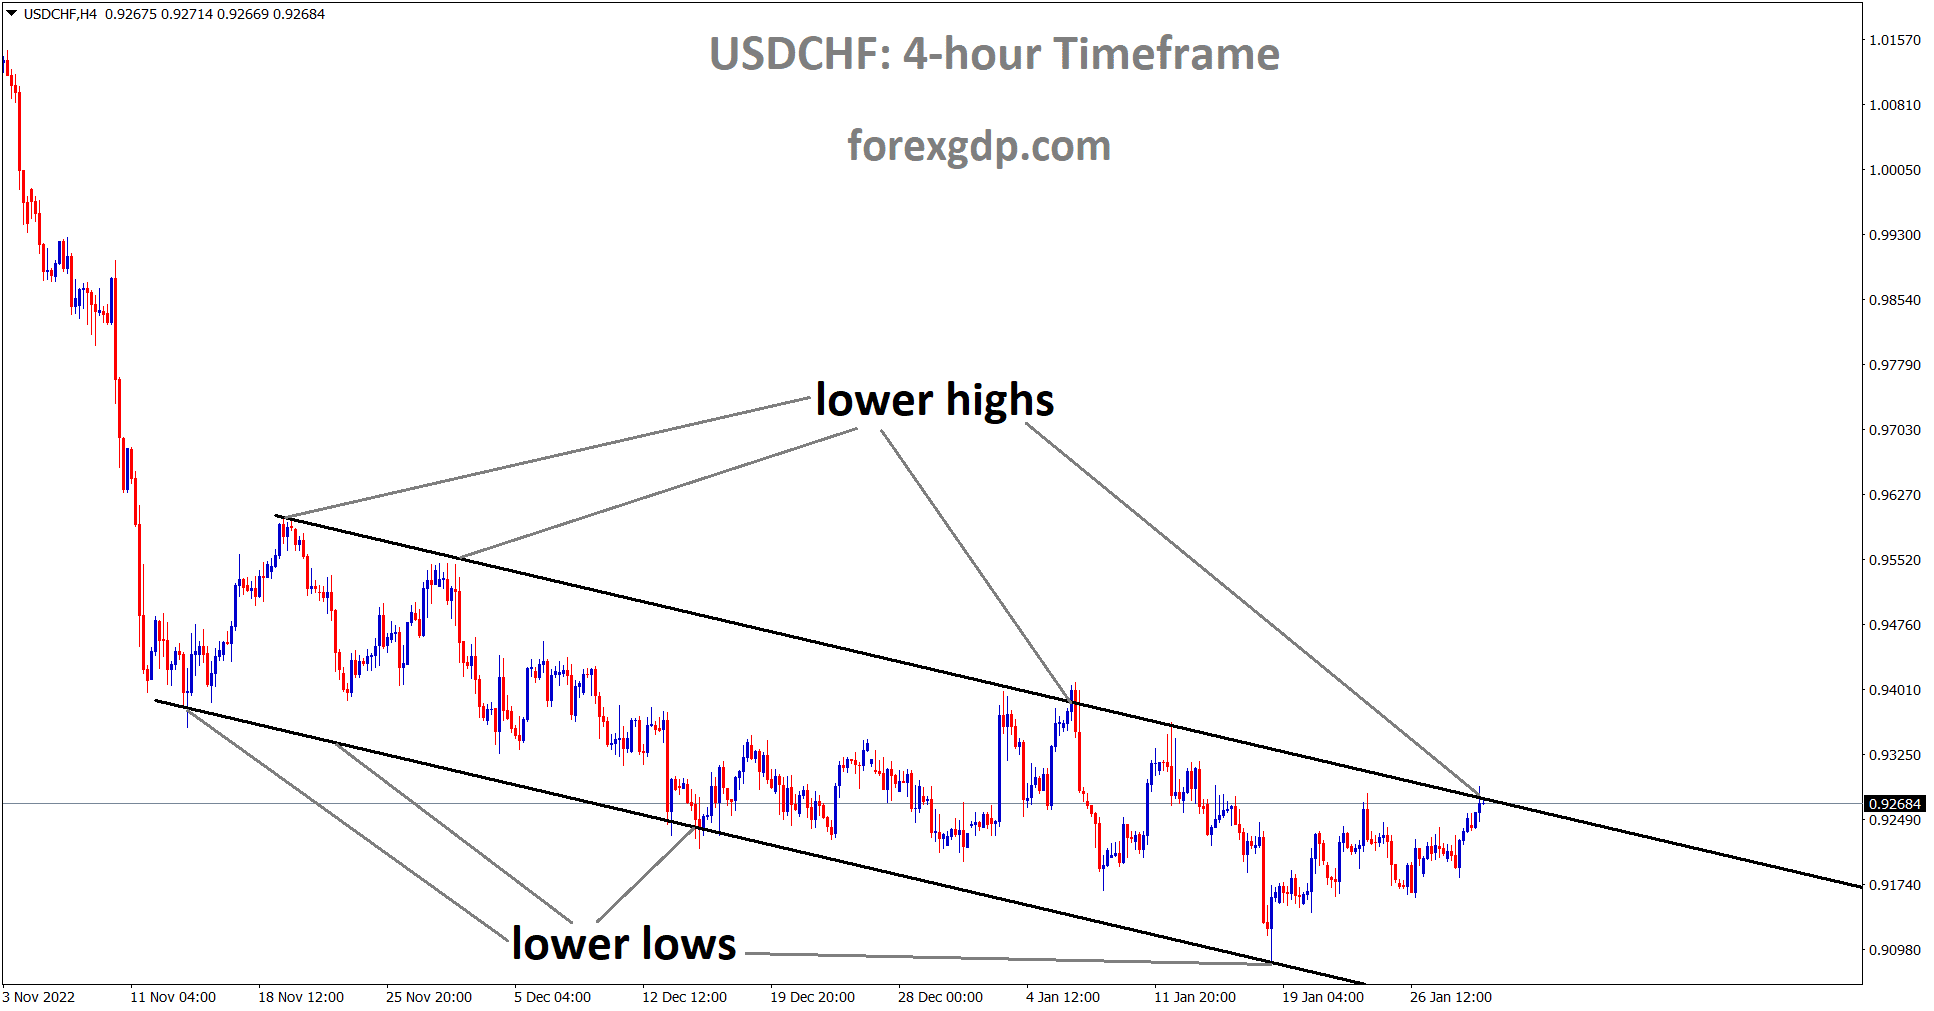 USDCHF is moving in Descending Channel and the market has reached the lower high area of the channel.